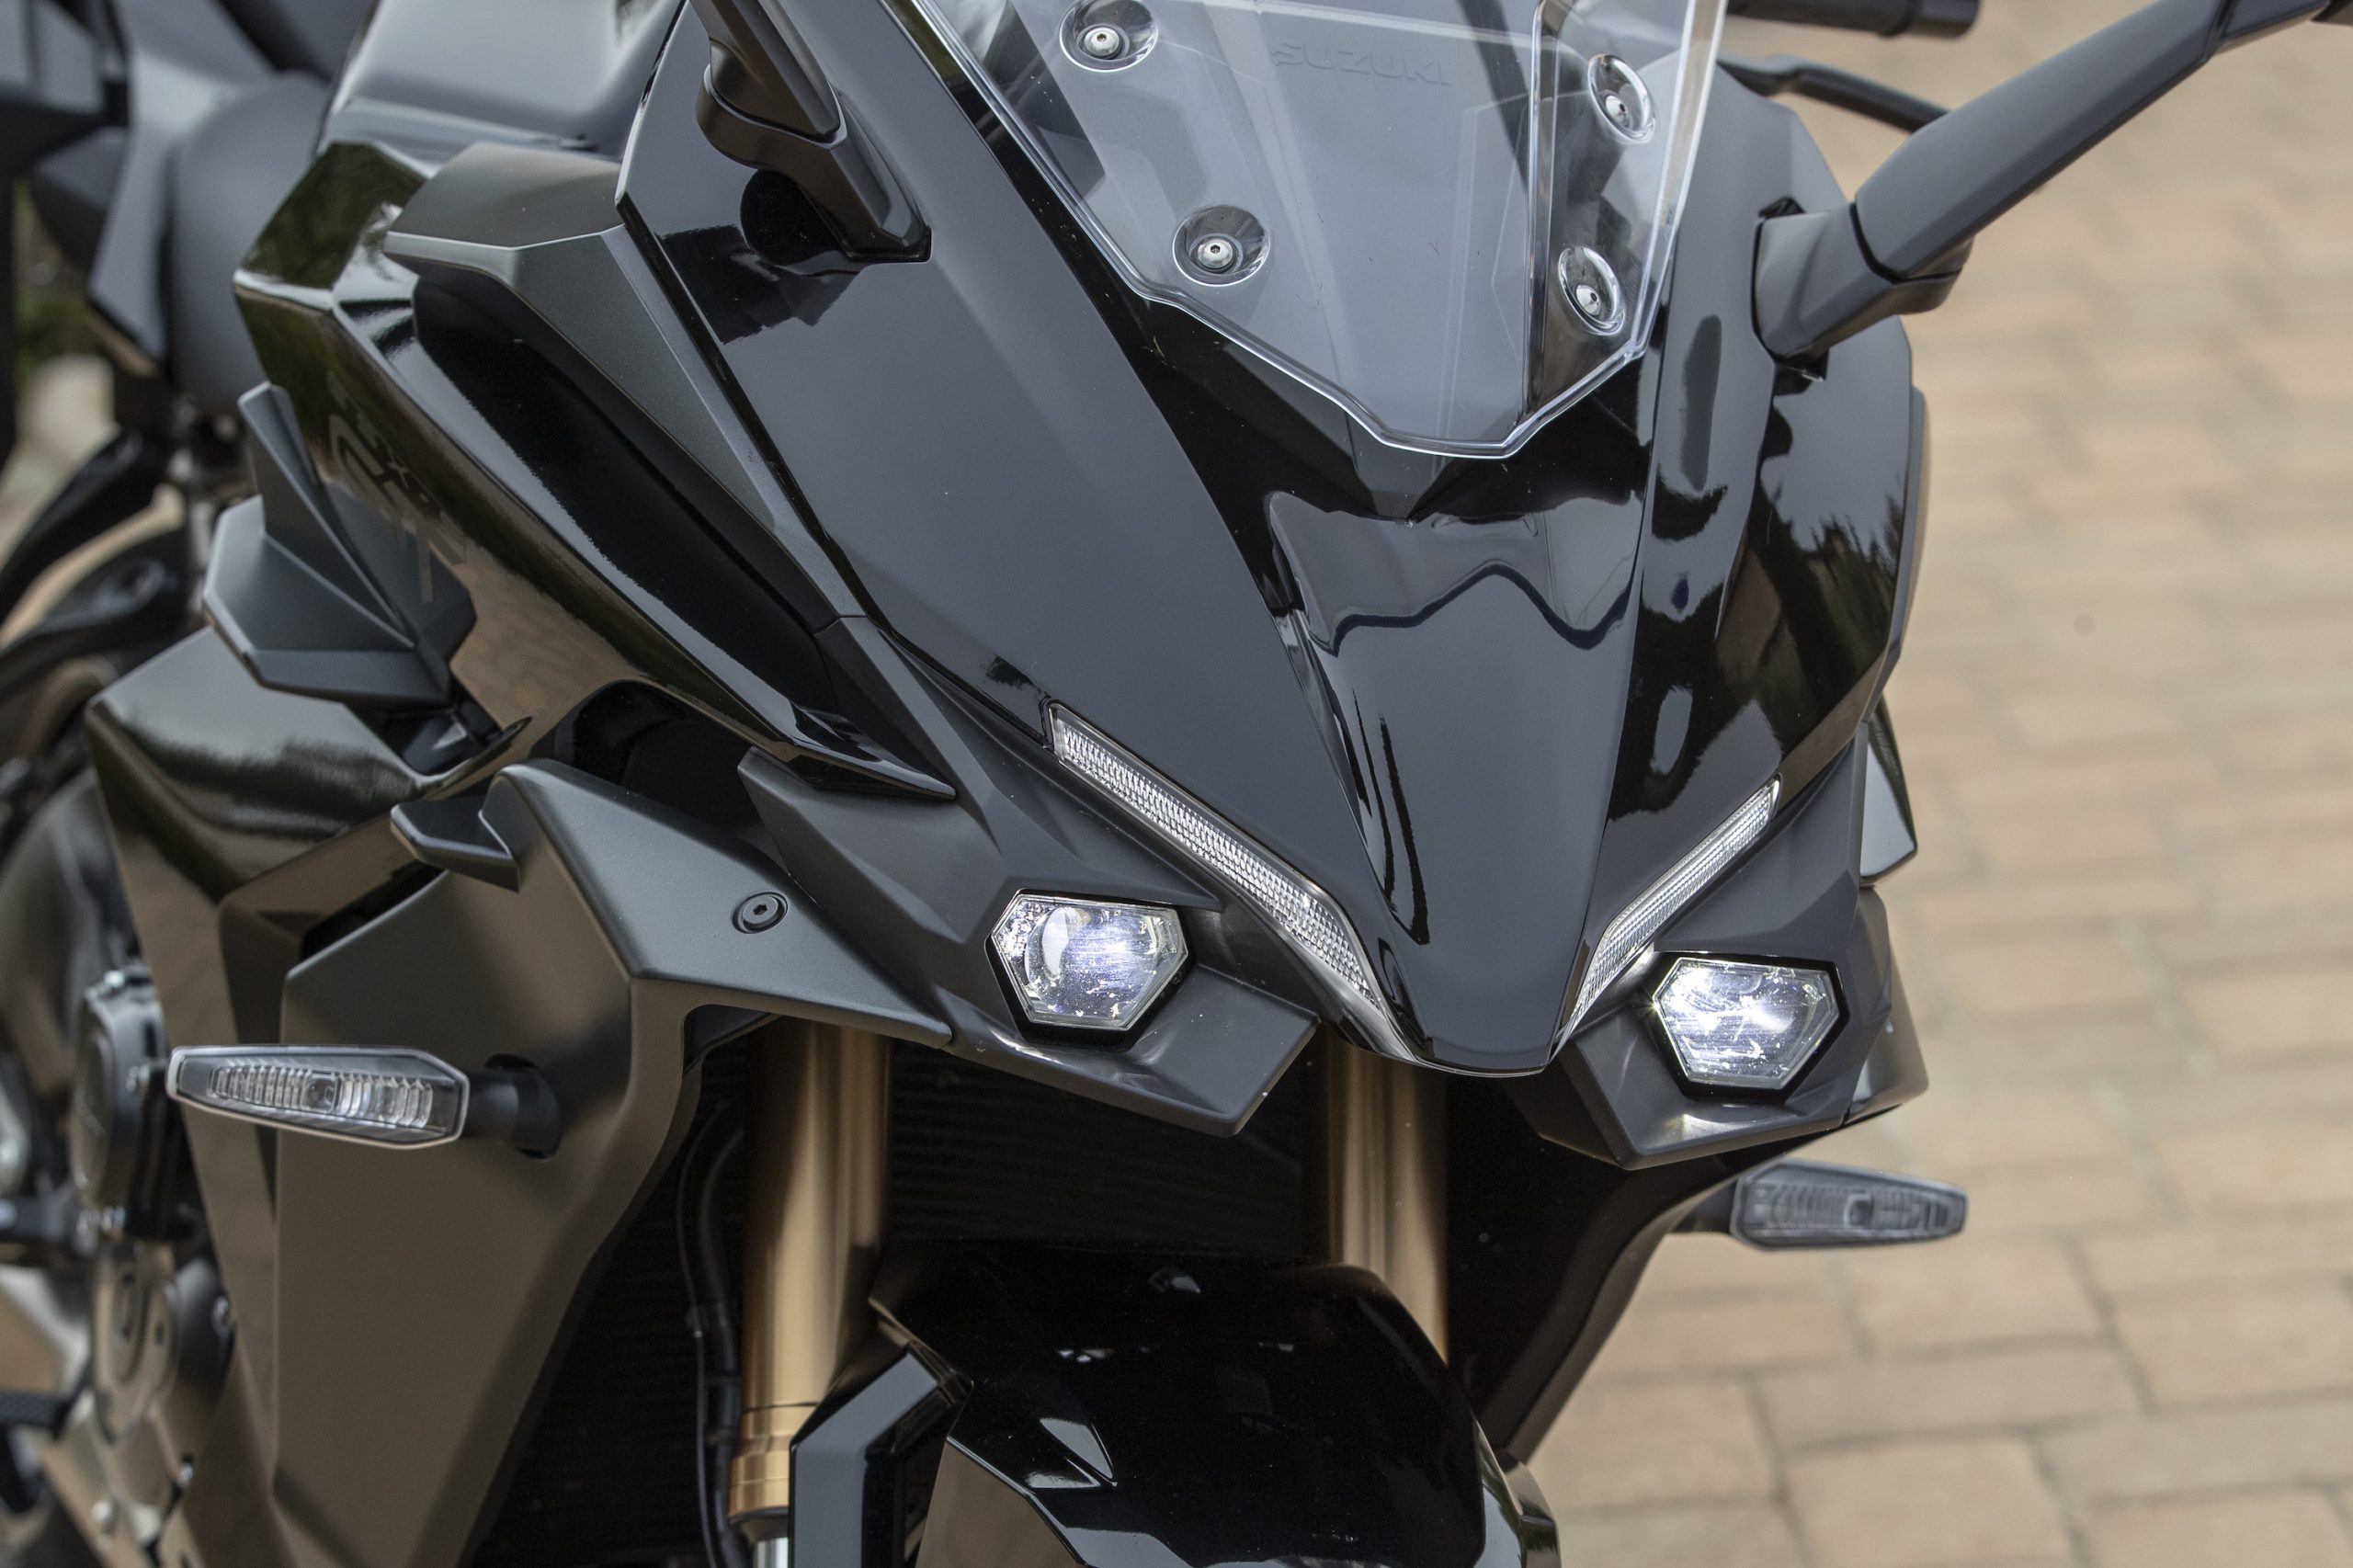 I love the aggressive, almost “mean” look of the front of the bike which employs small but strong mono-focus LED lights and very angular turn signals.